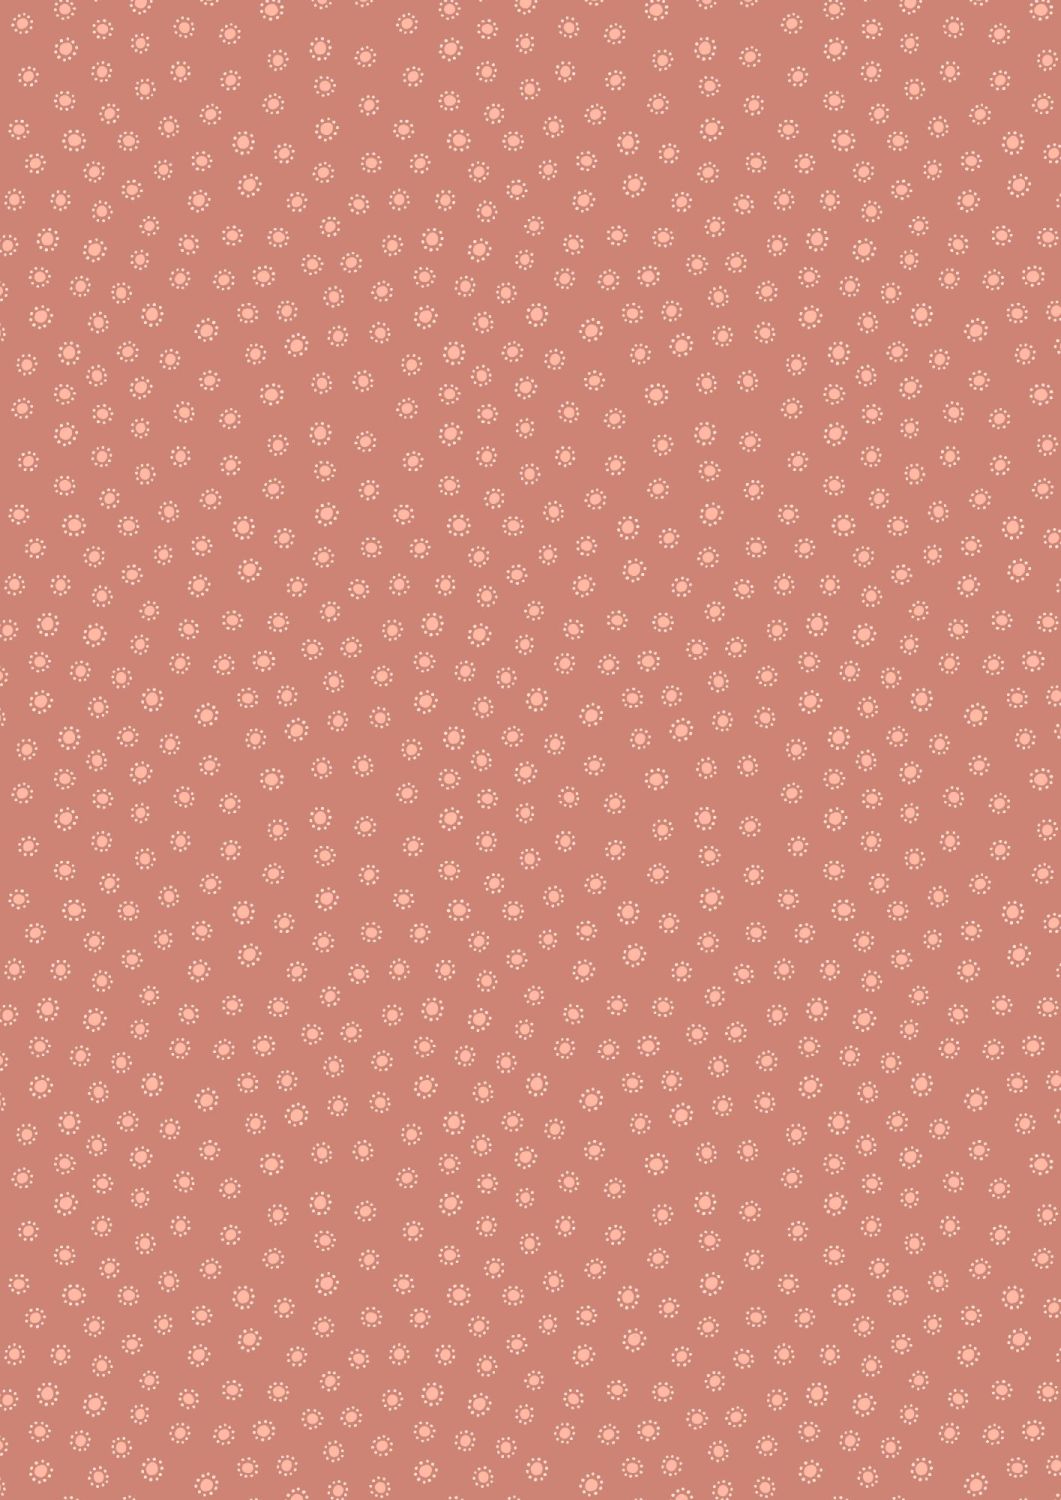 Lewis and Irene - Hannah's Flowers - Dotty Dots on Soft Terracotta